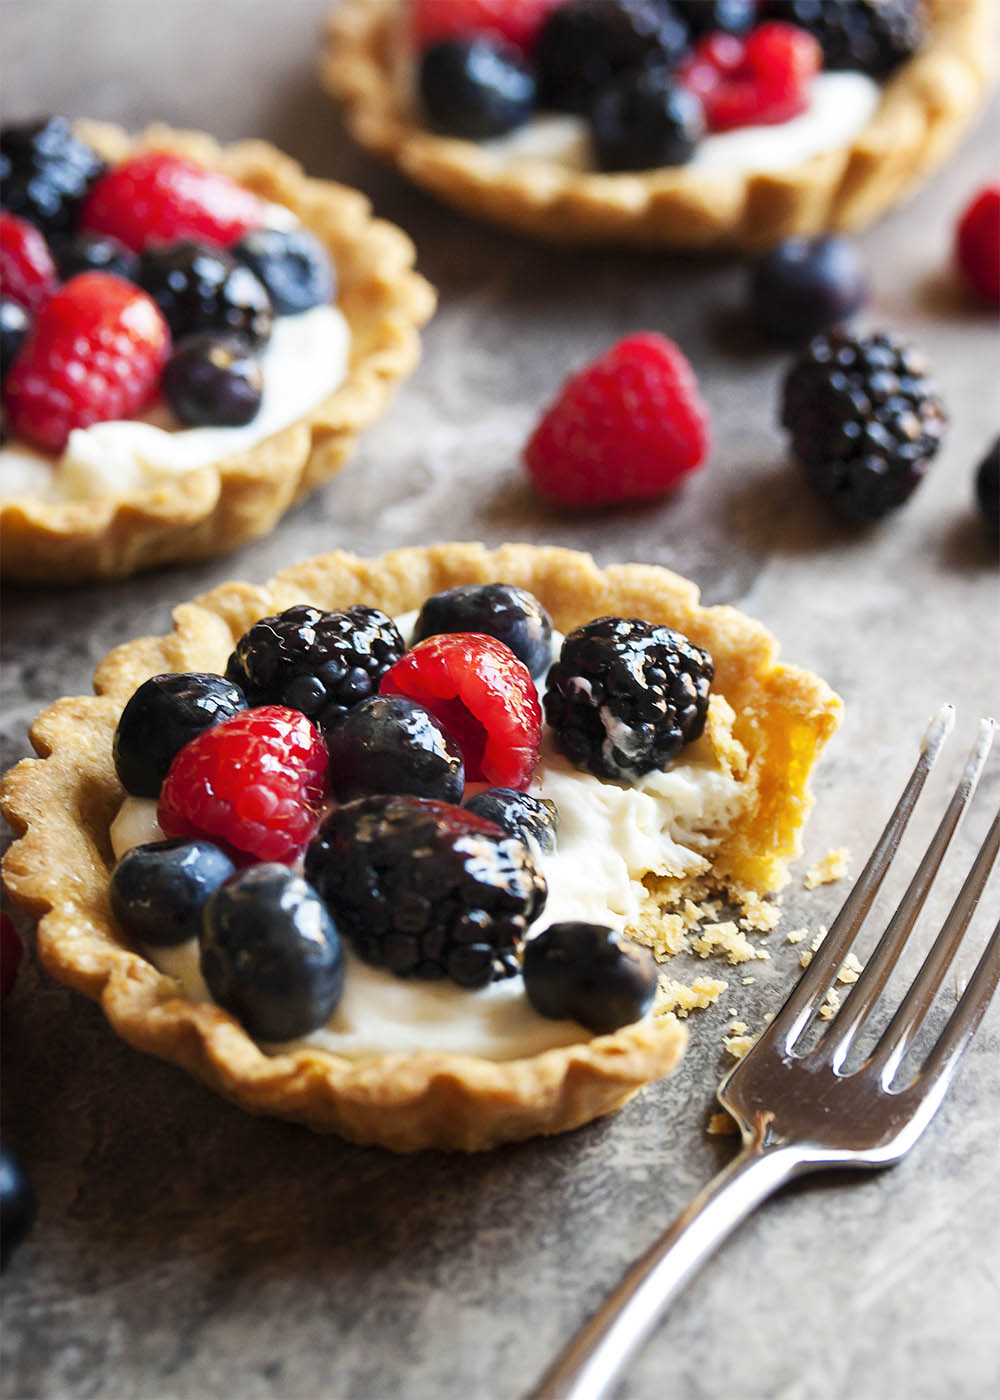 Mascarpone Fruit Tart - This fruit tart is filled a mixture of mascarpone cheese, cream cheese, and heavy cream all of which is whipped up and sweetened with maple syrup. It is then topped with mixed berries and brushed with a simple apricot jelly glaze. | justalittlebitofbacon.com